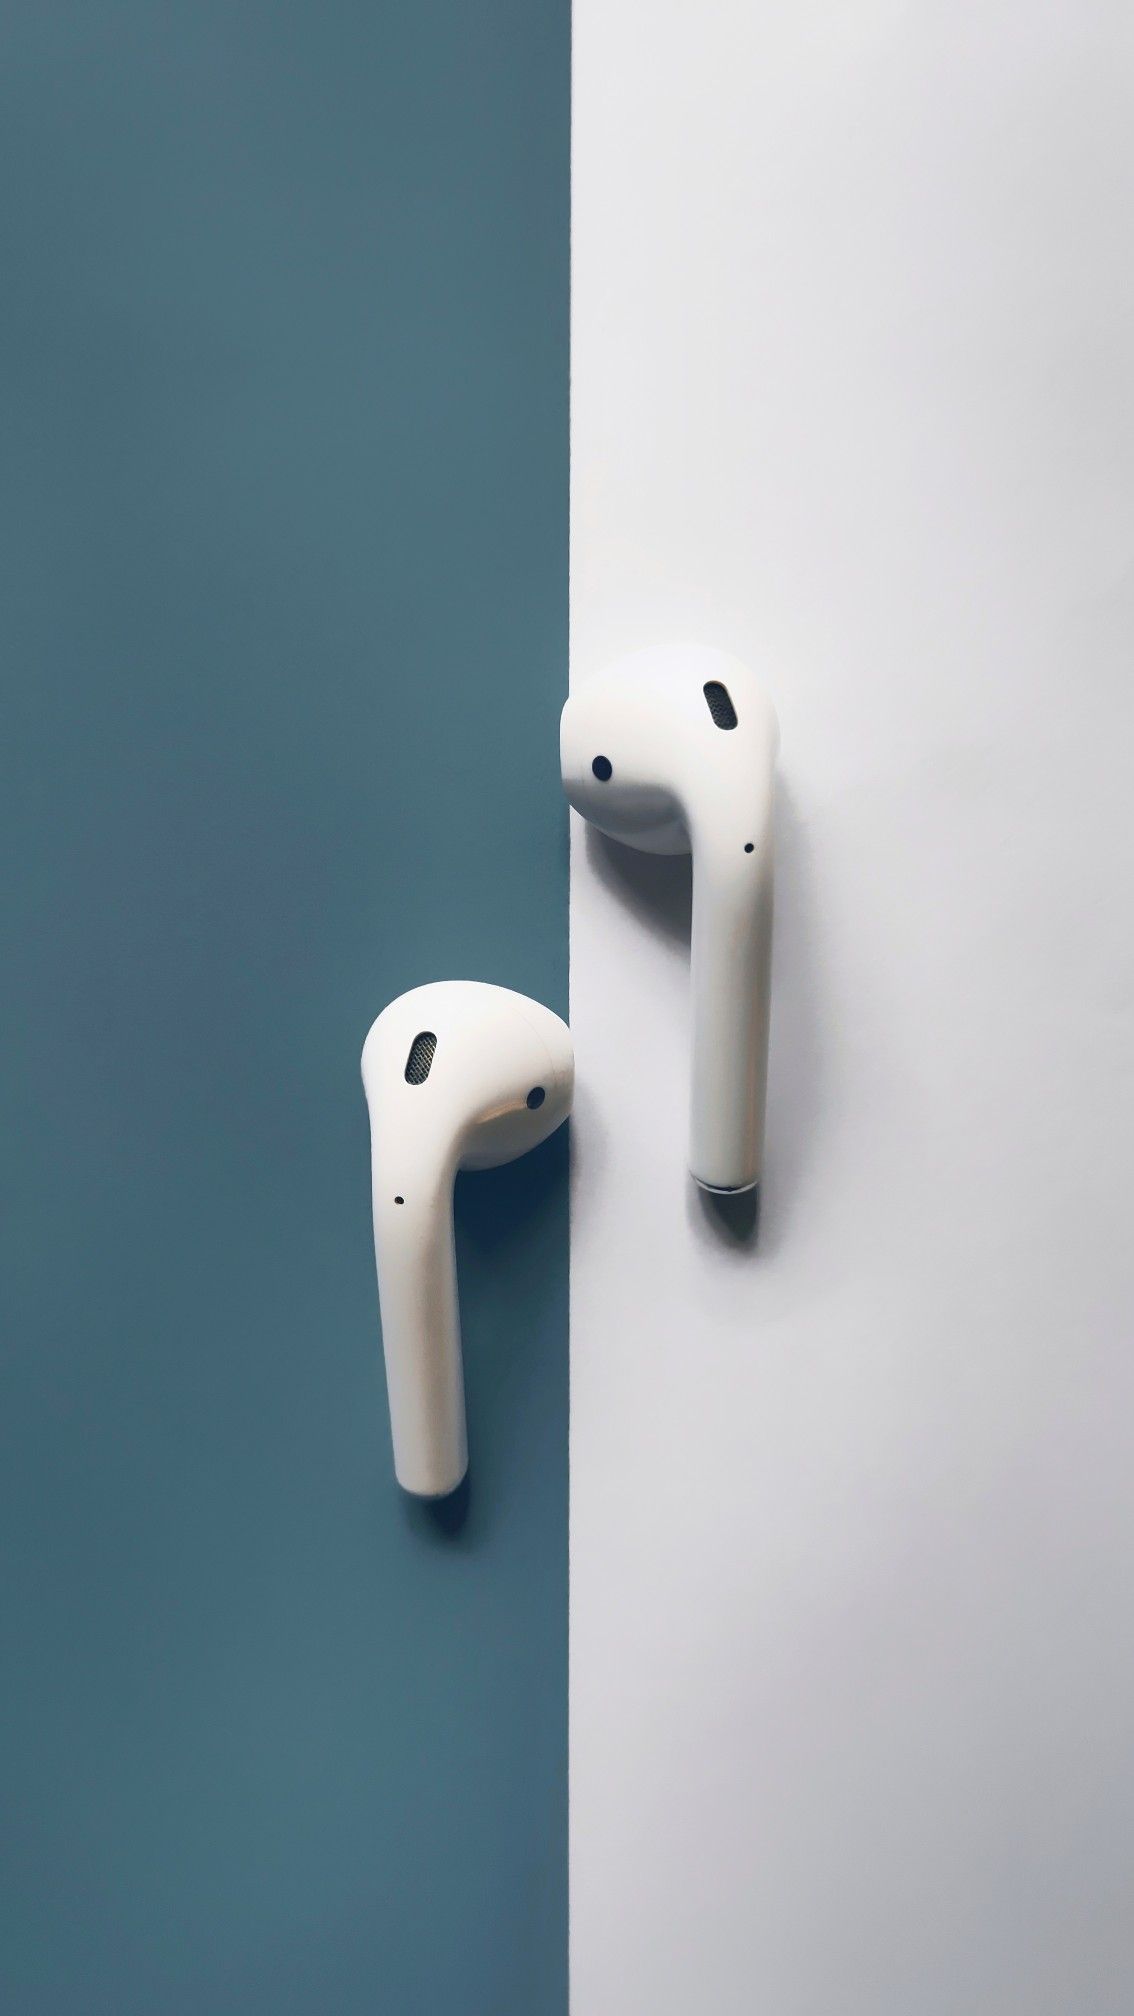 How to Use AirPods with Android